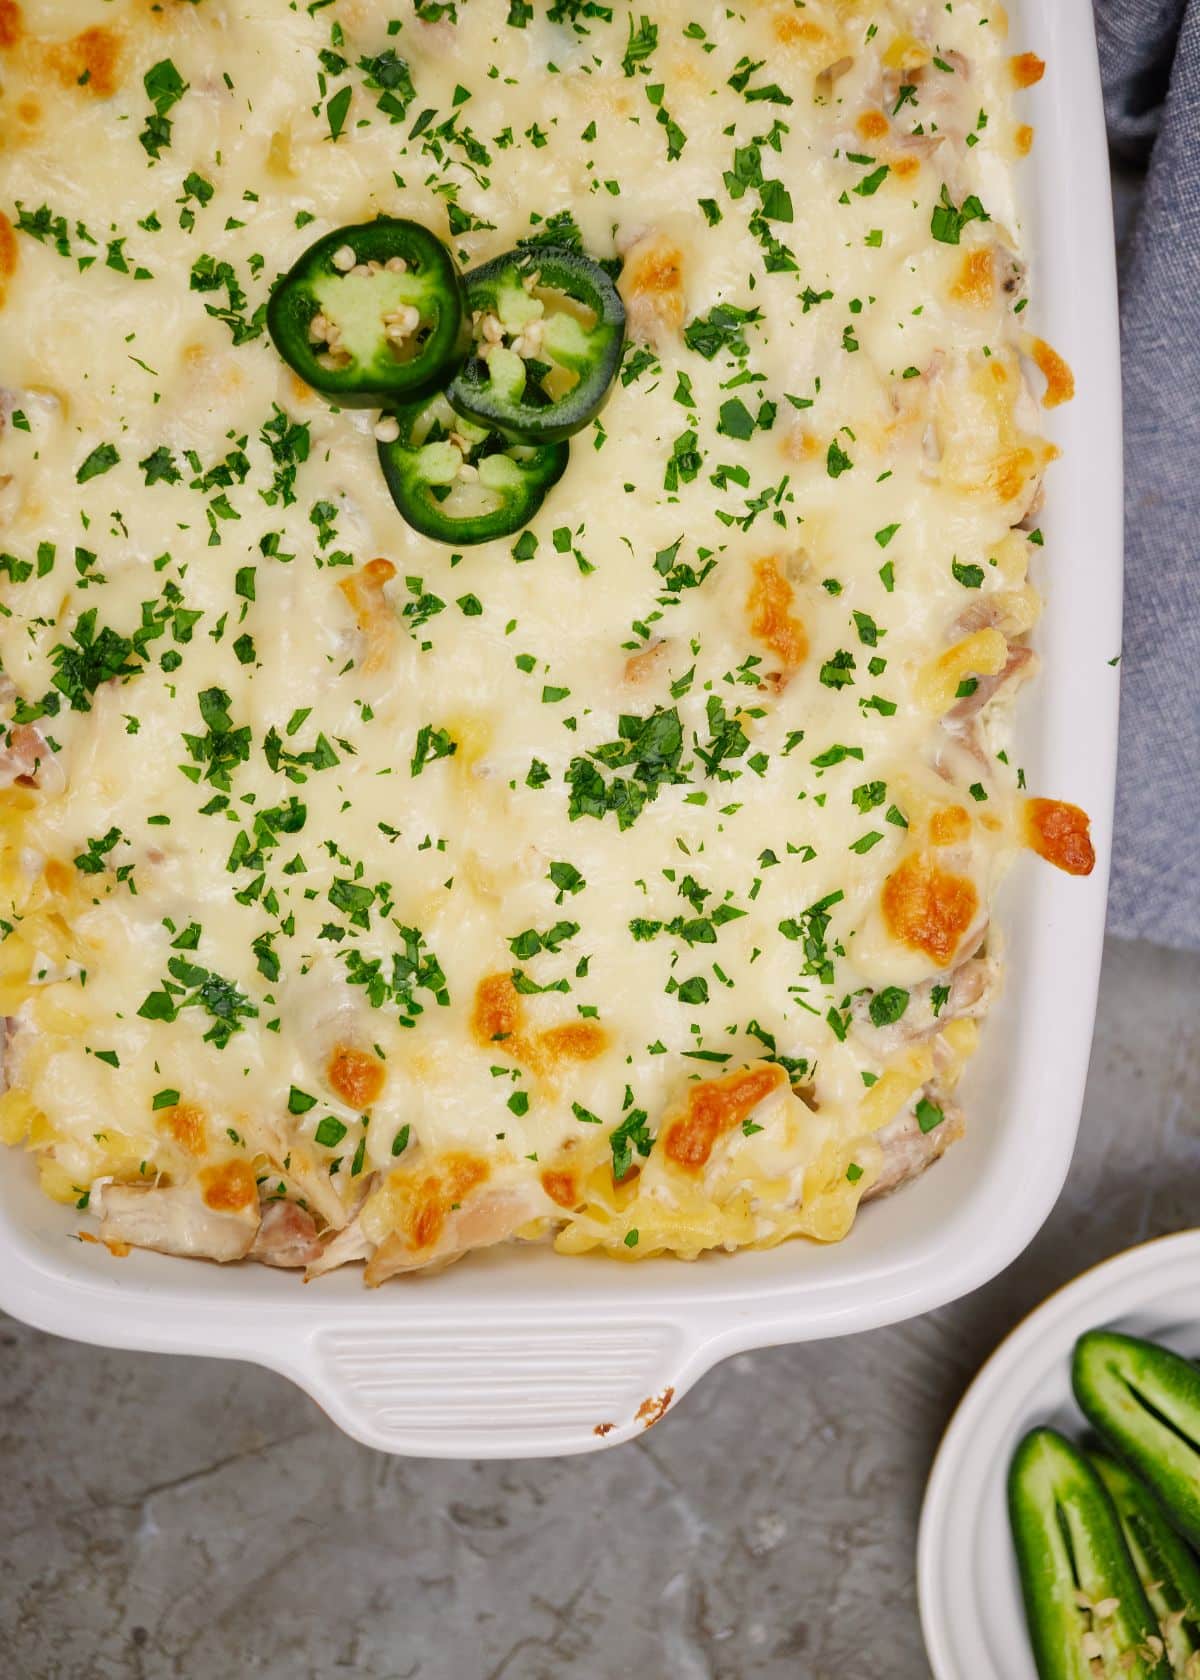 image of red baking dish with white trim filled with jalapeno popper chicken casserole